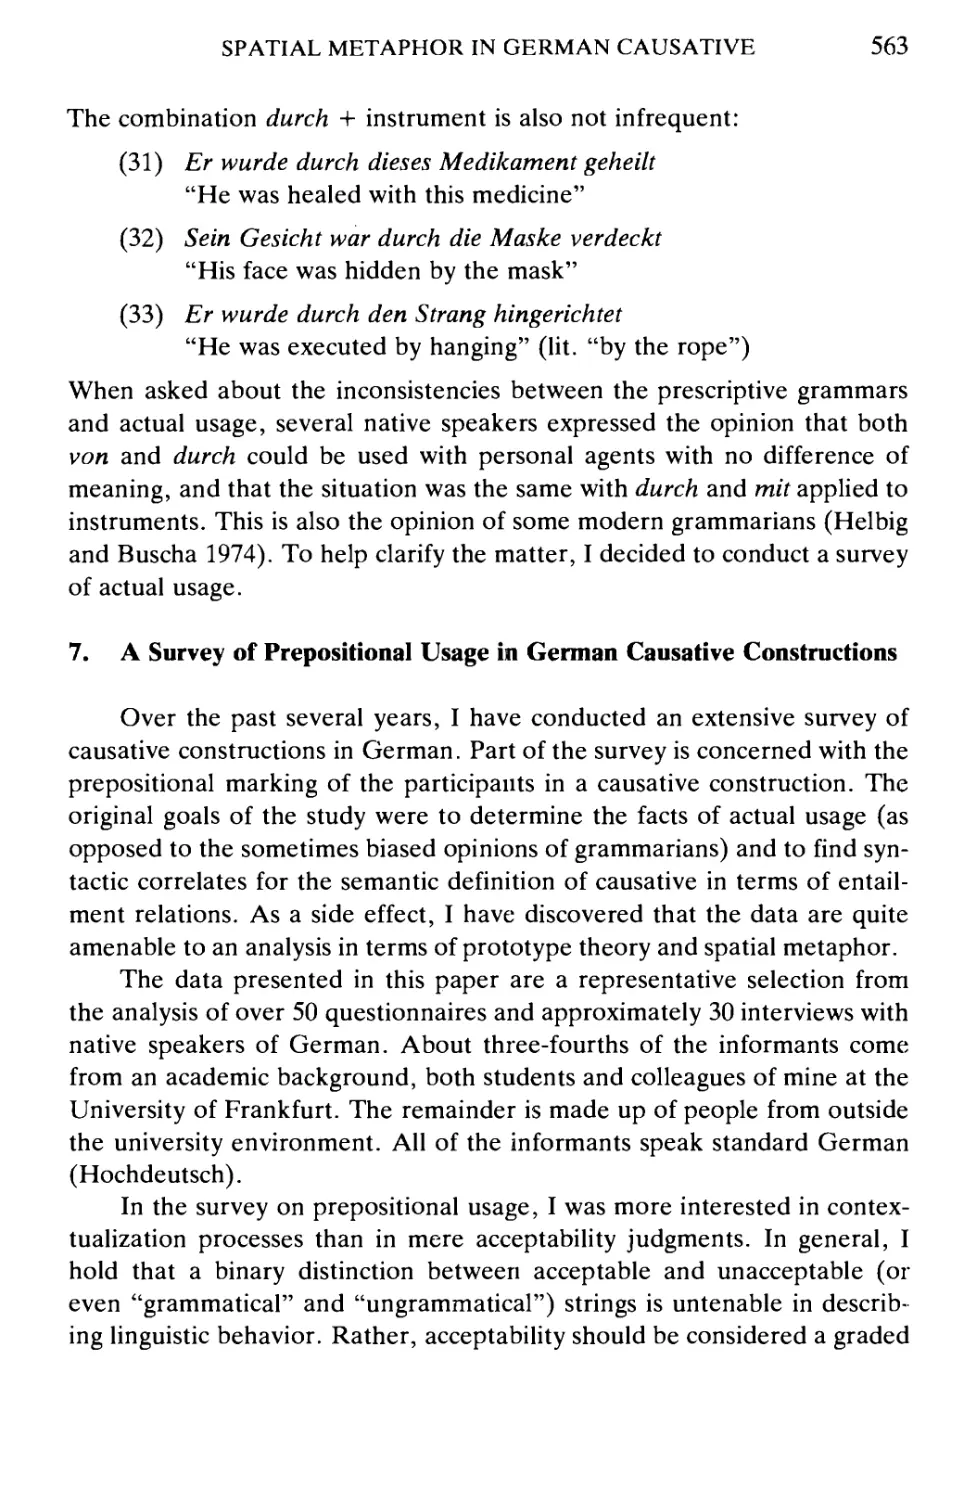 7. A Survey of Prepositional Usage in German Causative Constructions